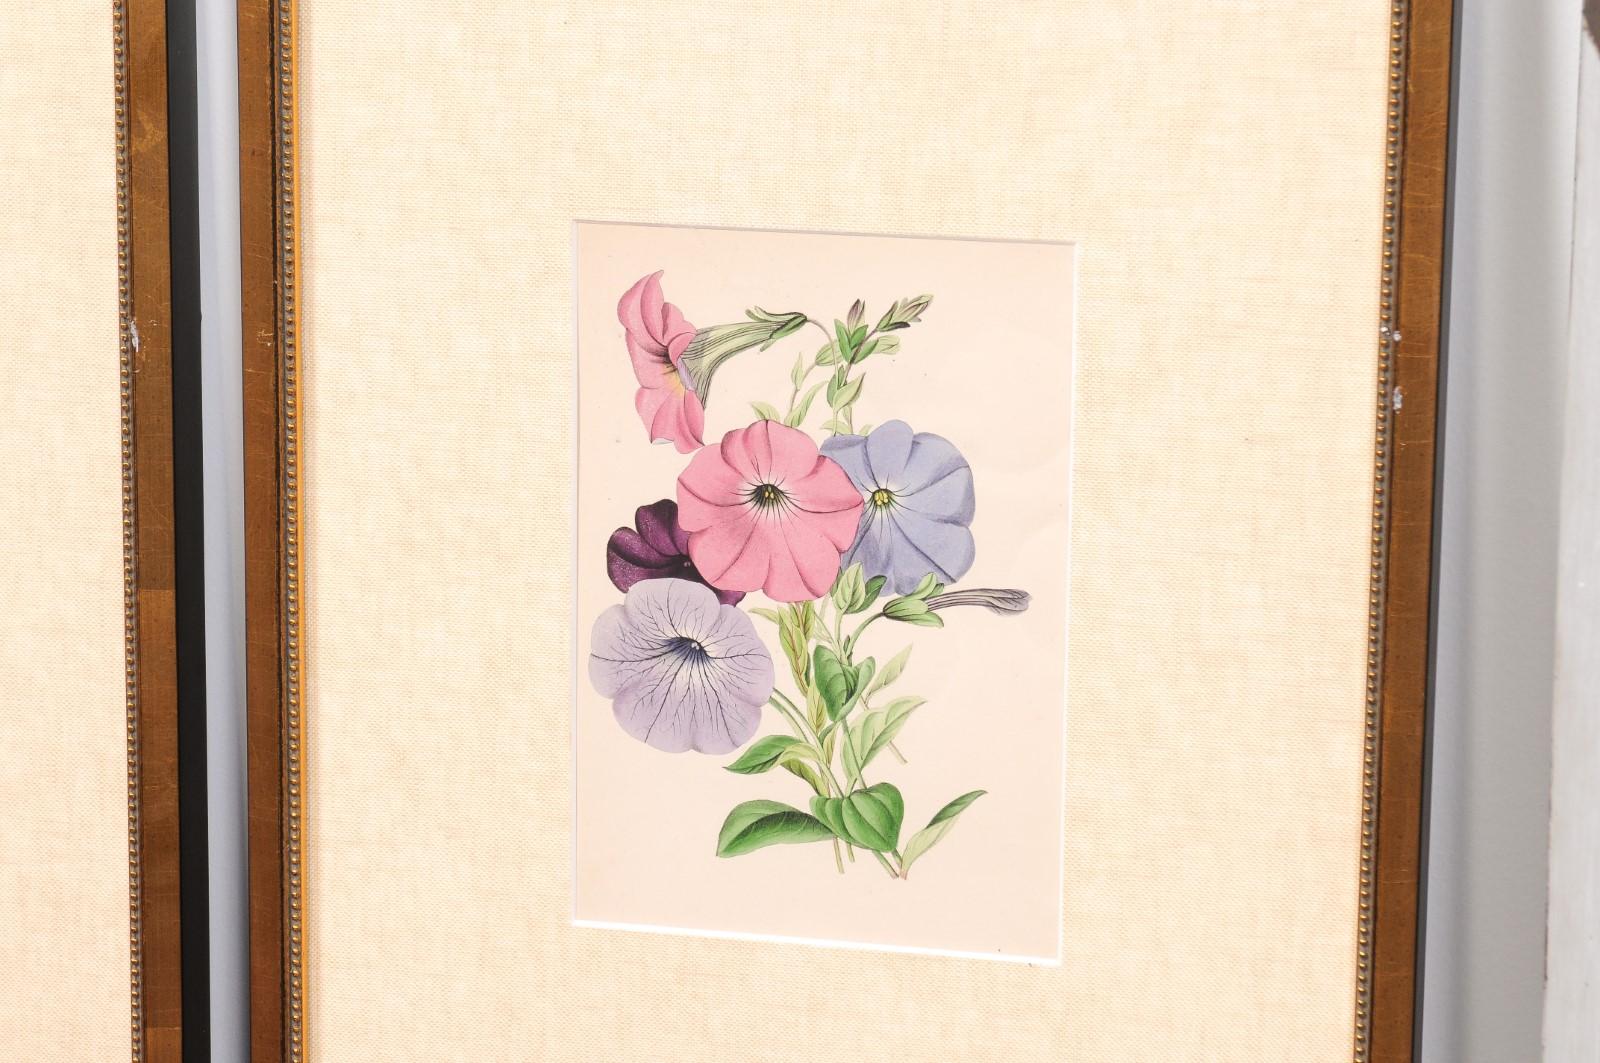  Victorian Floral Prints from The Museum of Flowers by Mary Elizabeth Rosenberg For Sale 13